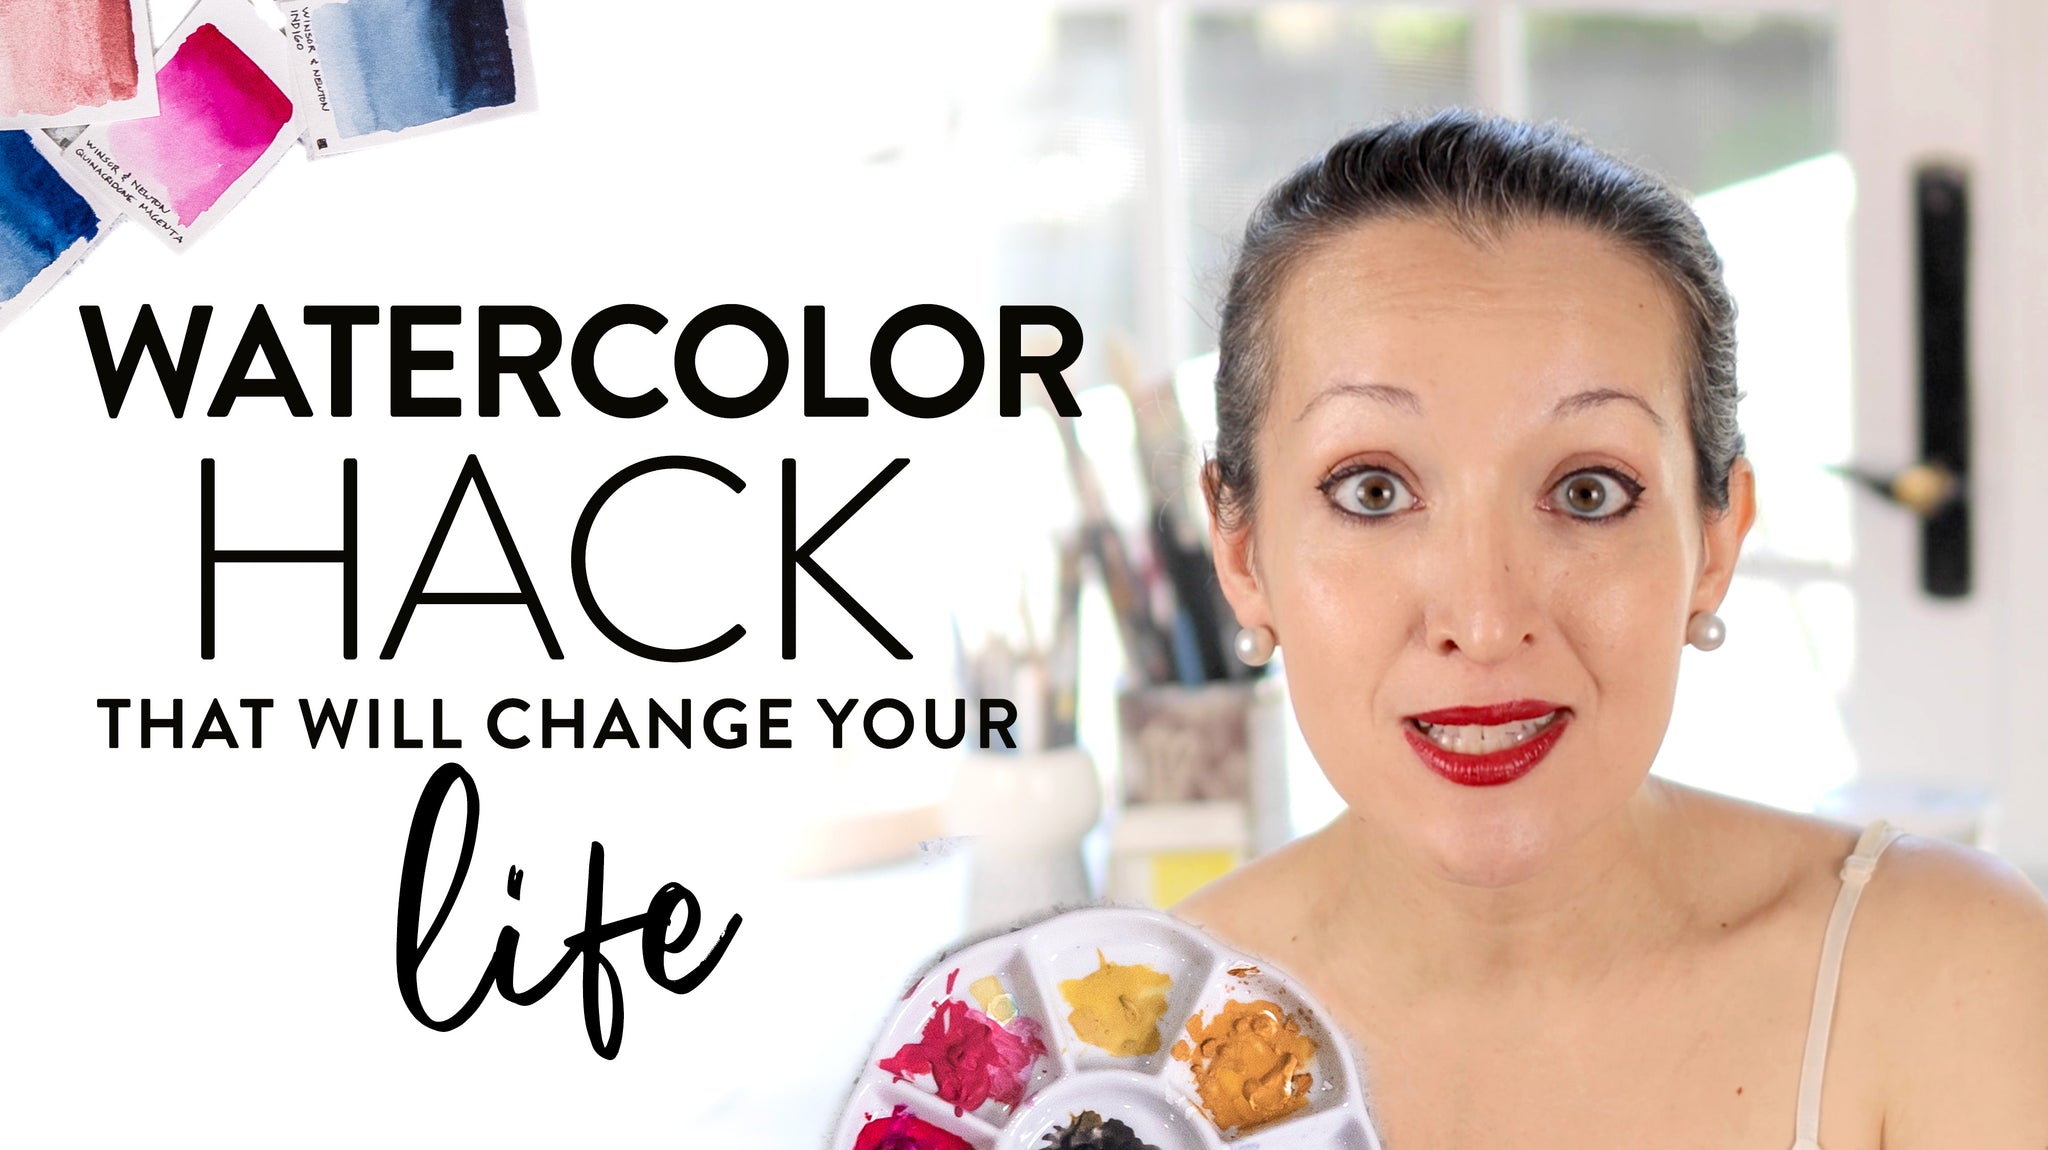 The watercolor hack that will change your life